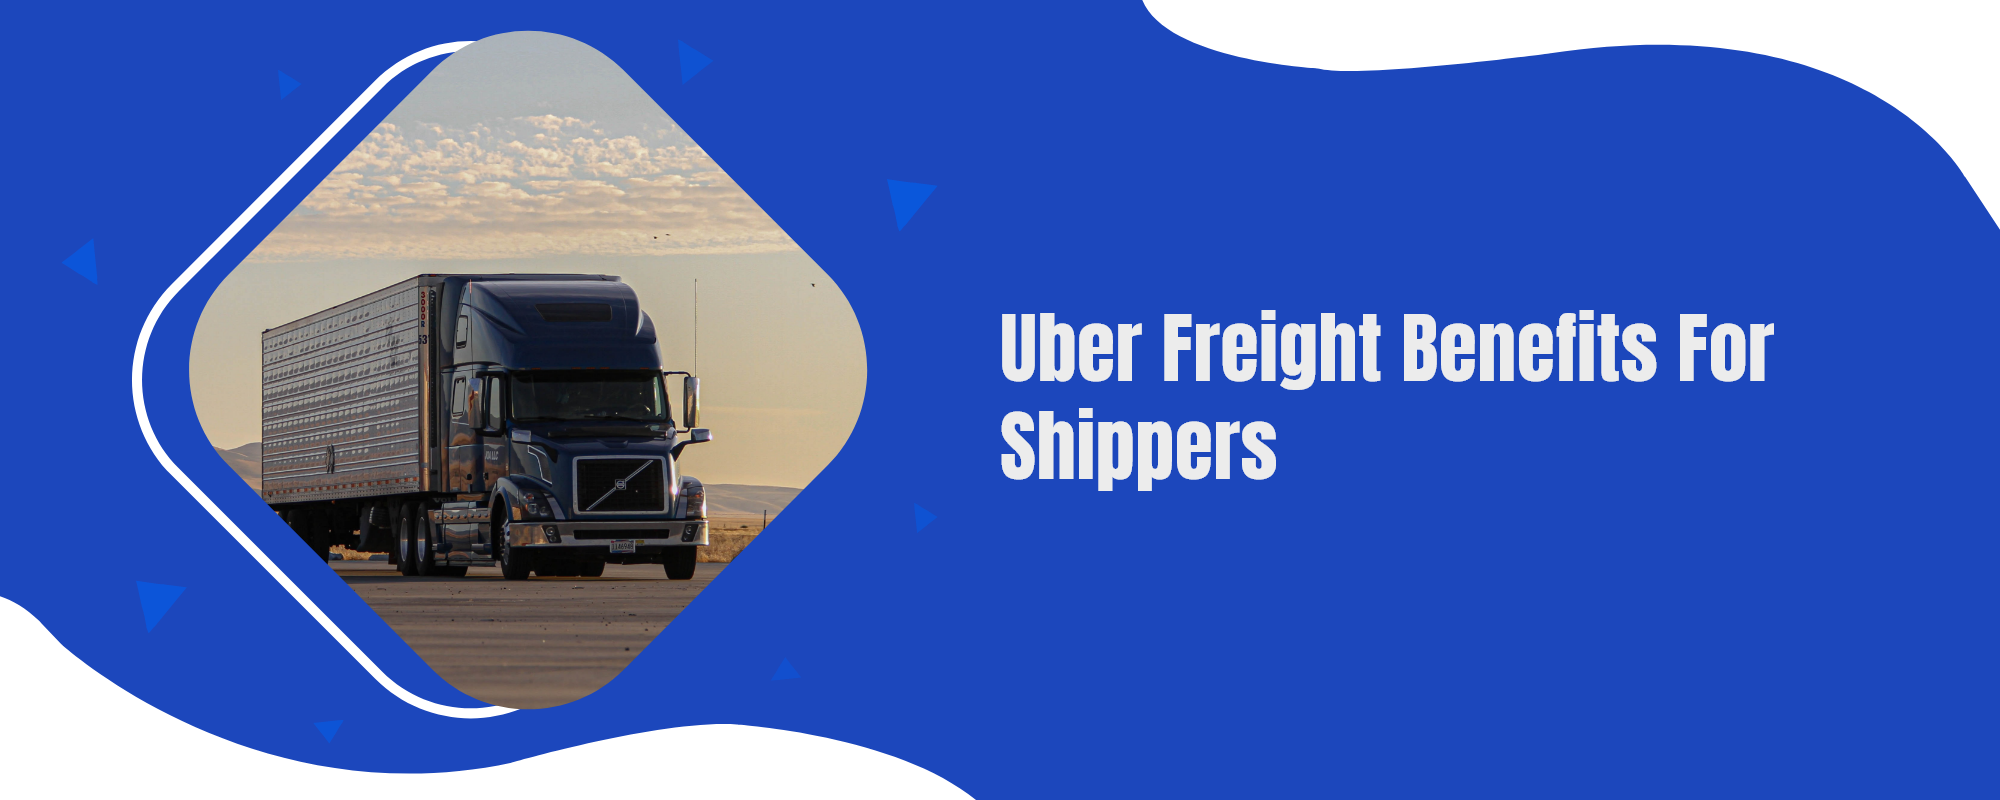 Uber freight benefits for shippers